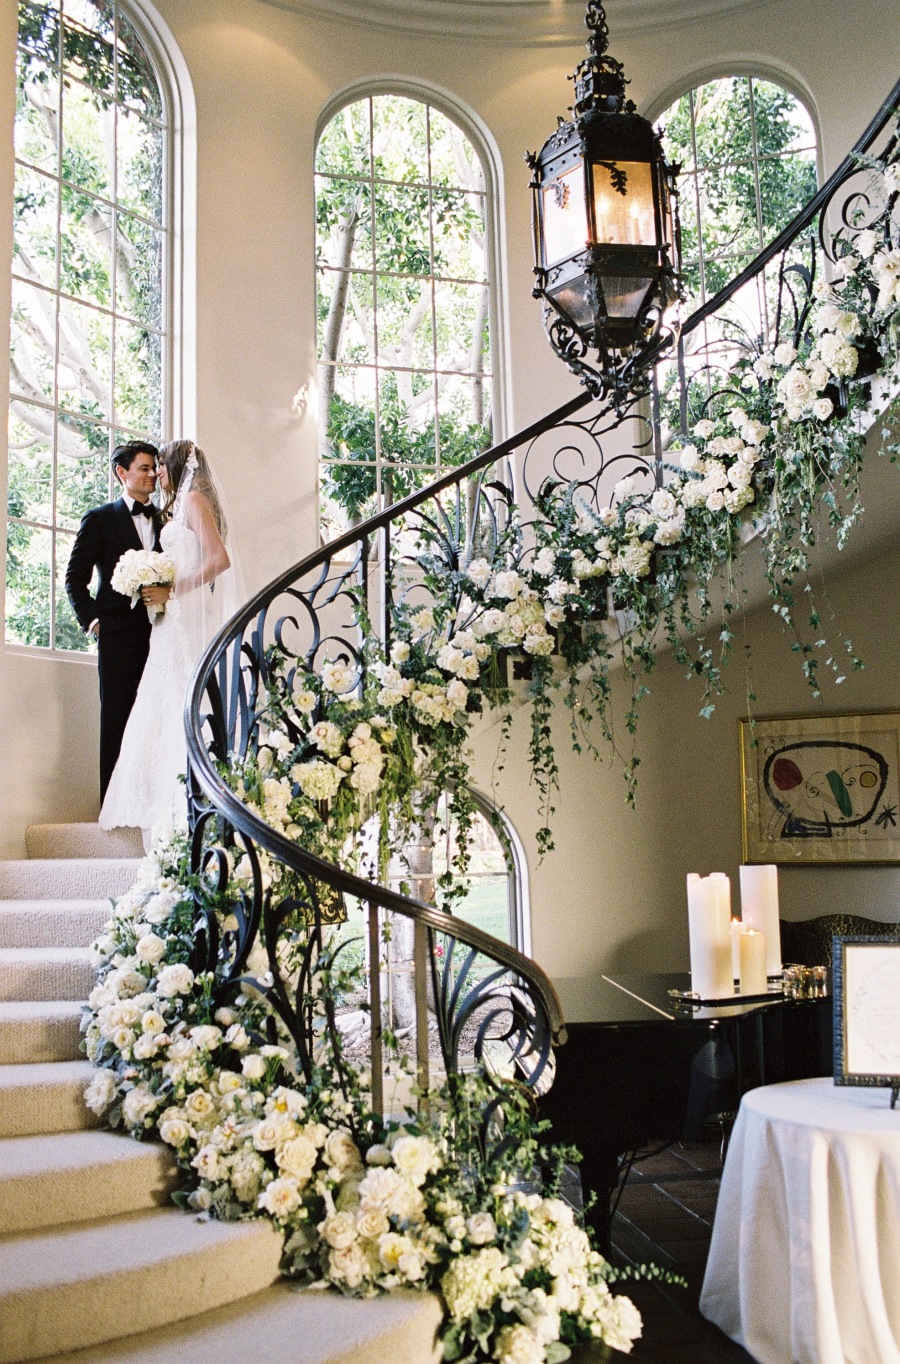 4 Show Stopping Wedding Flower Ideas - floral staircase garland